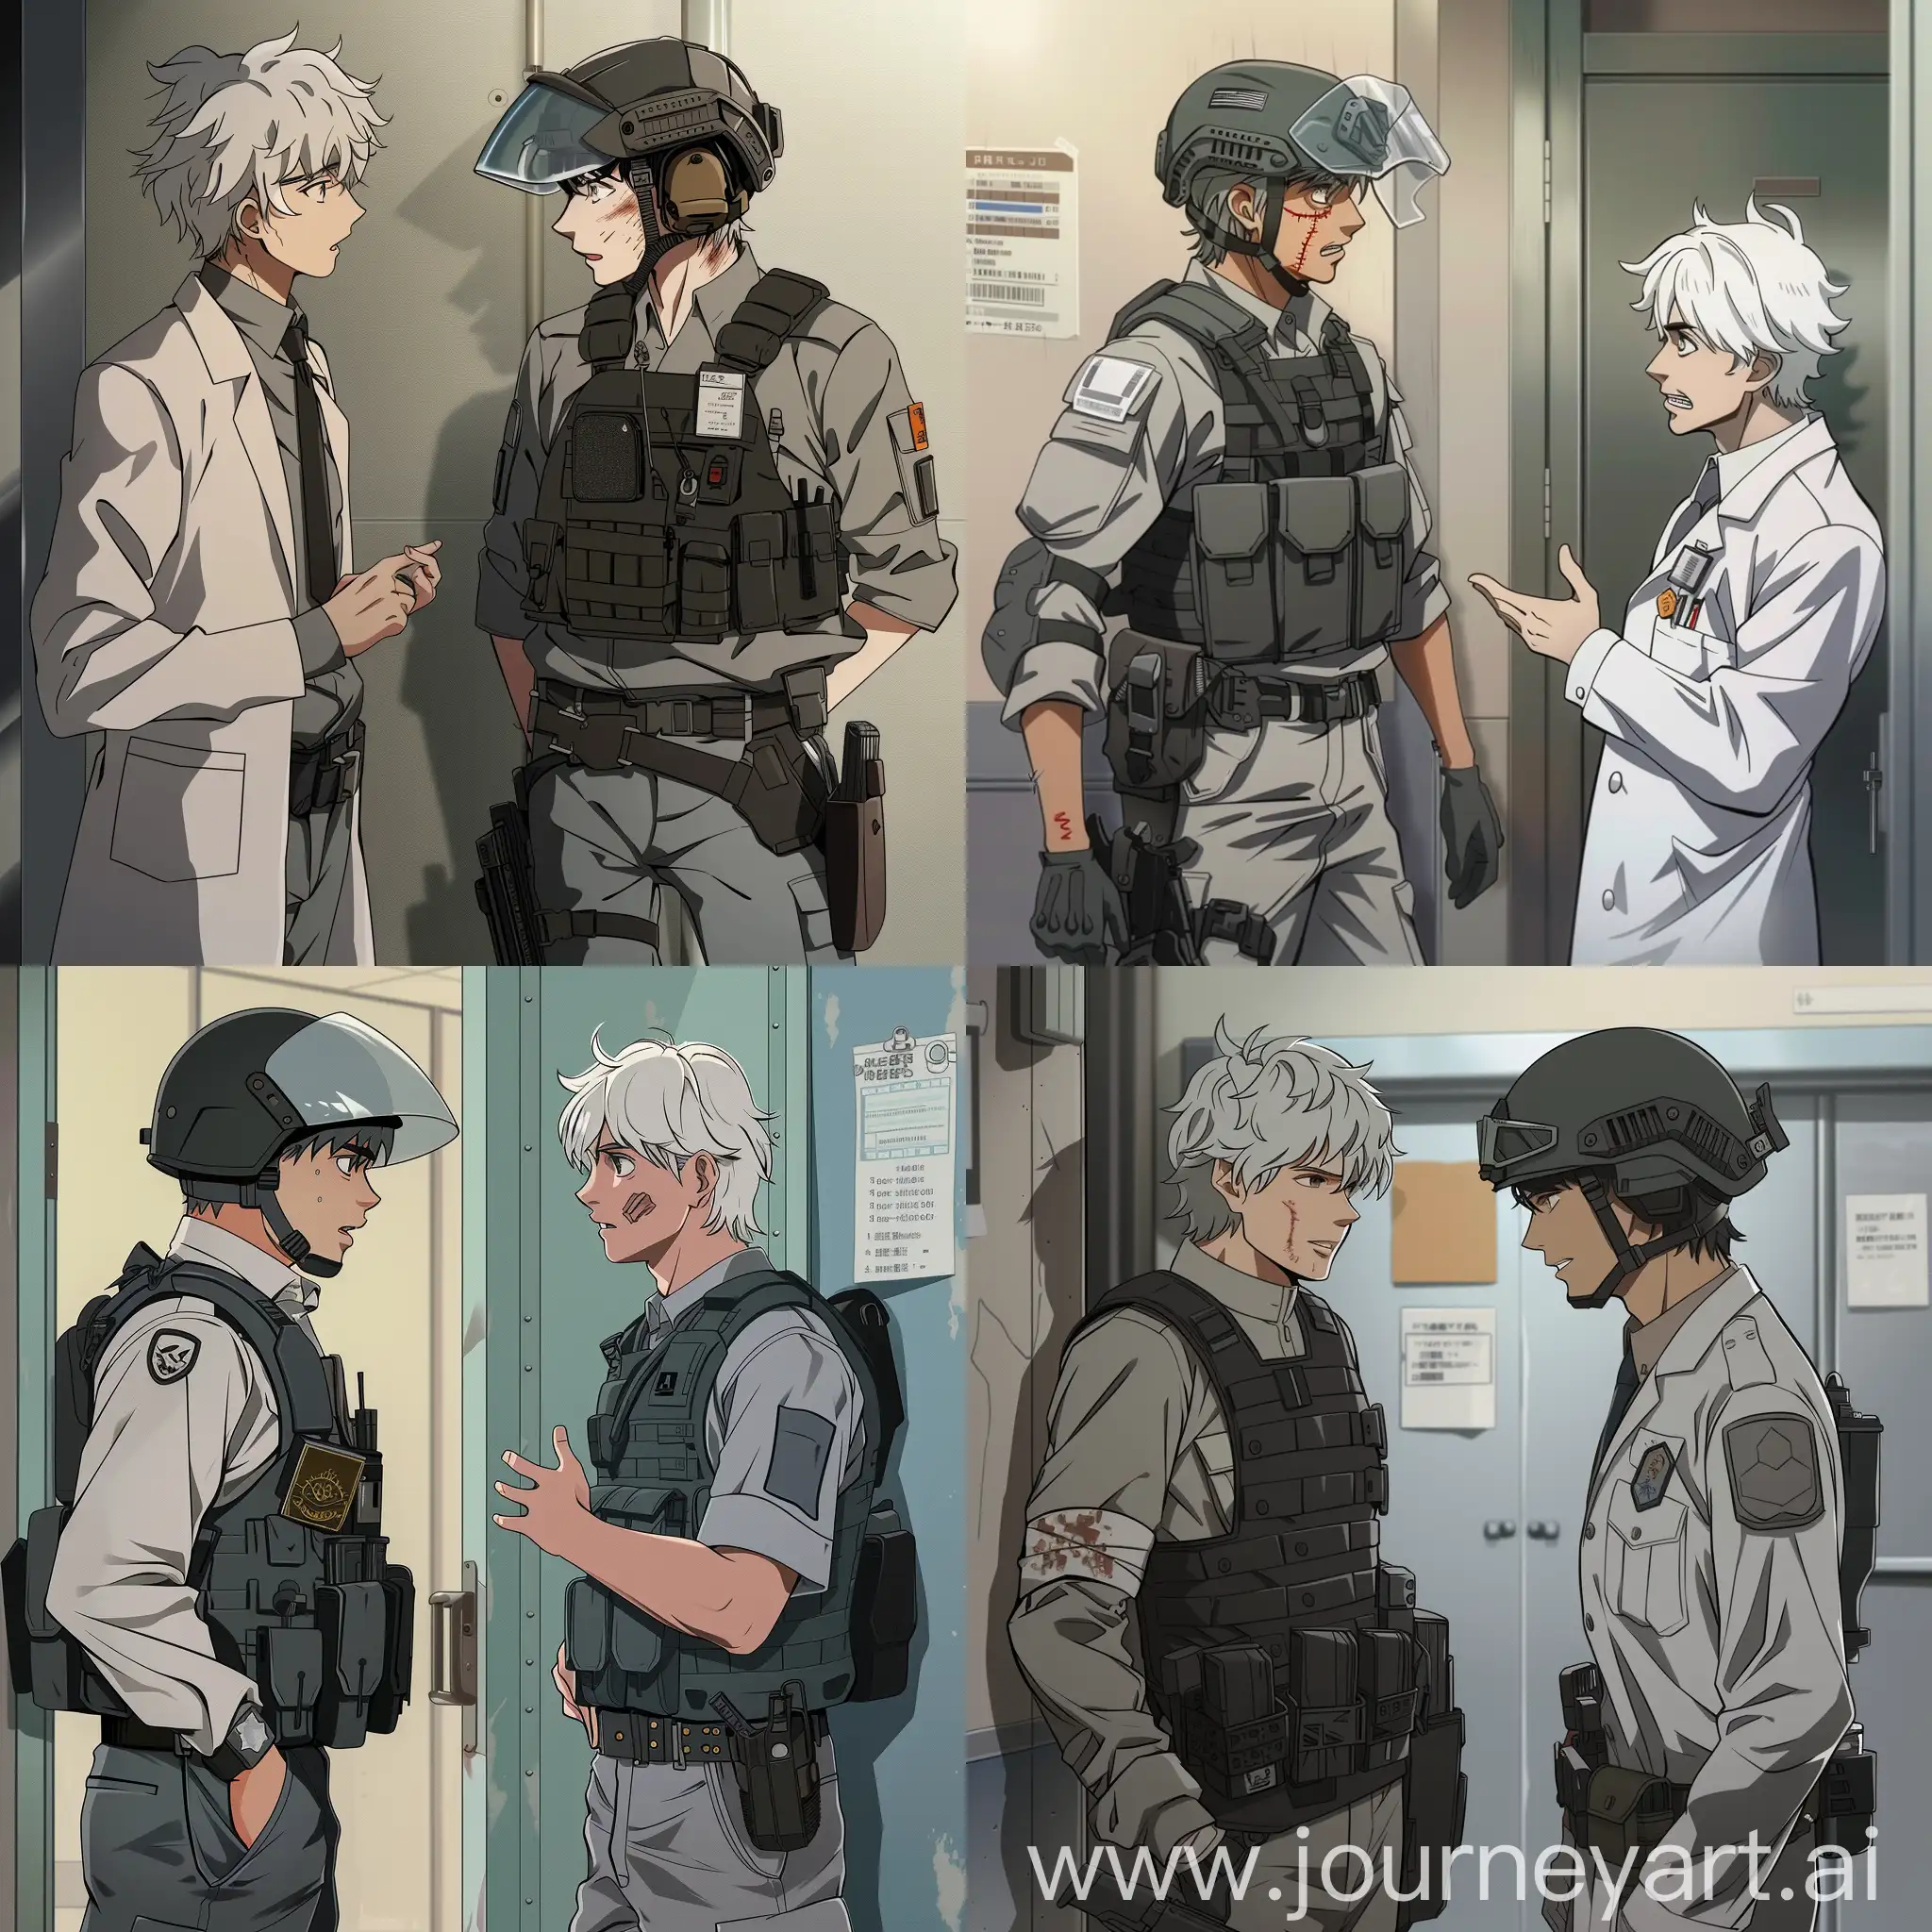 Security-Service-Employee-Talking-to-Scientist-in-Anime-Style